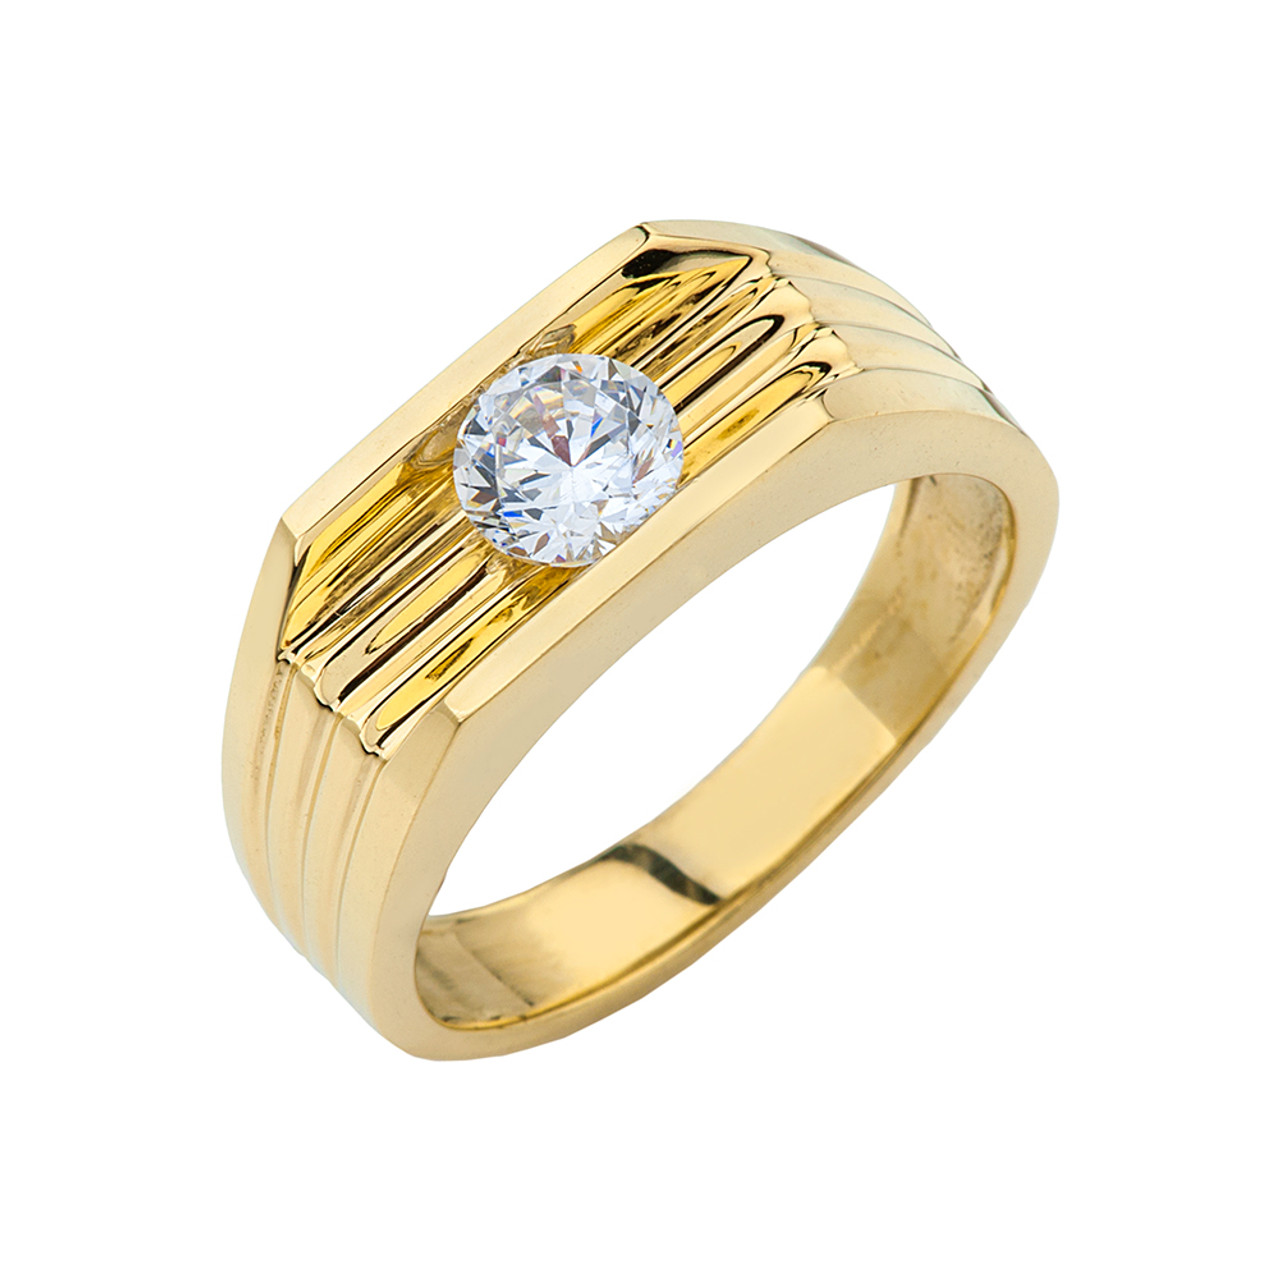 Yellow Gold Design Mens Ring with 1ct Cubic Zirconia Center Stone